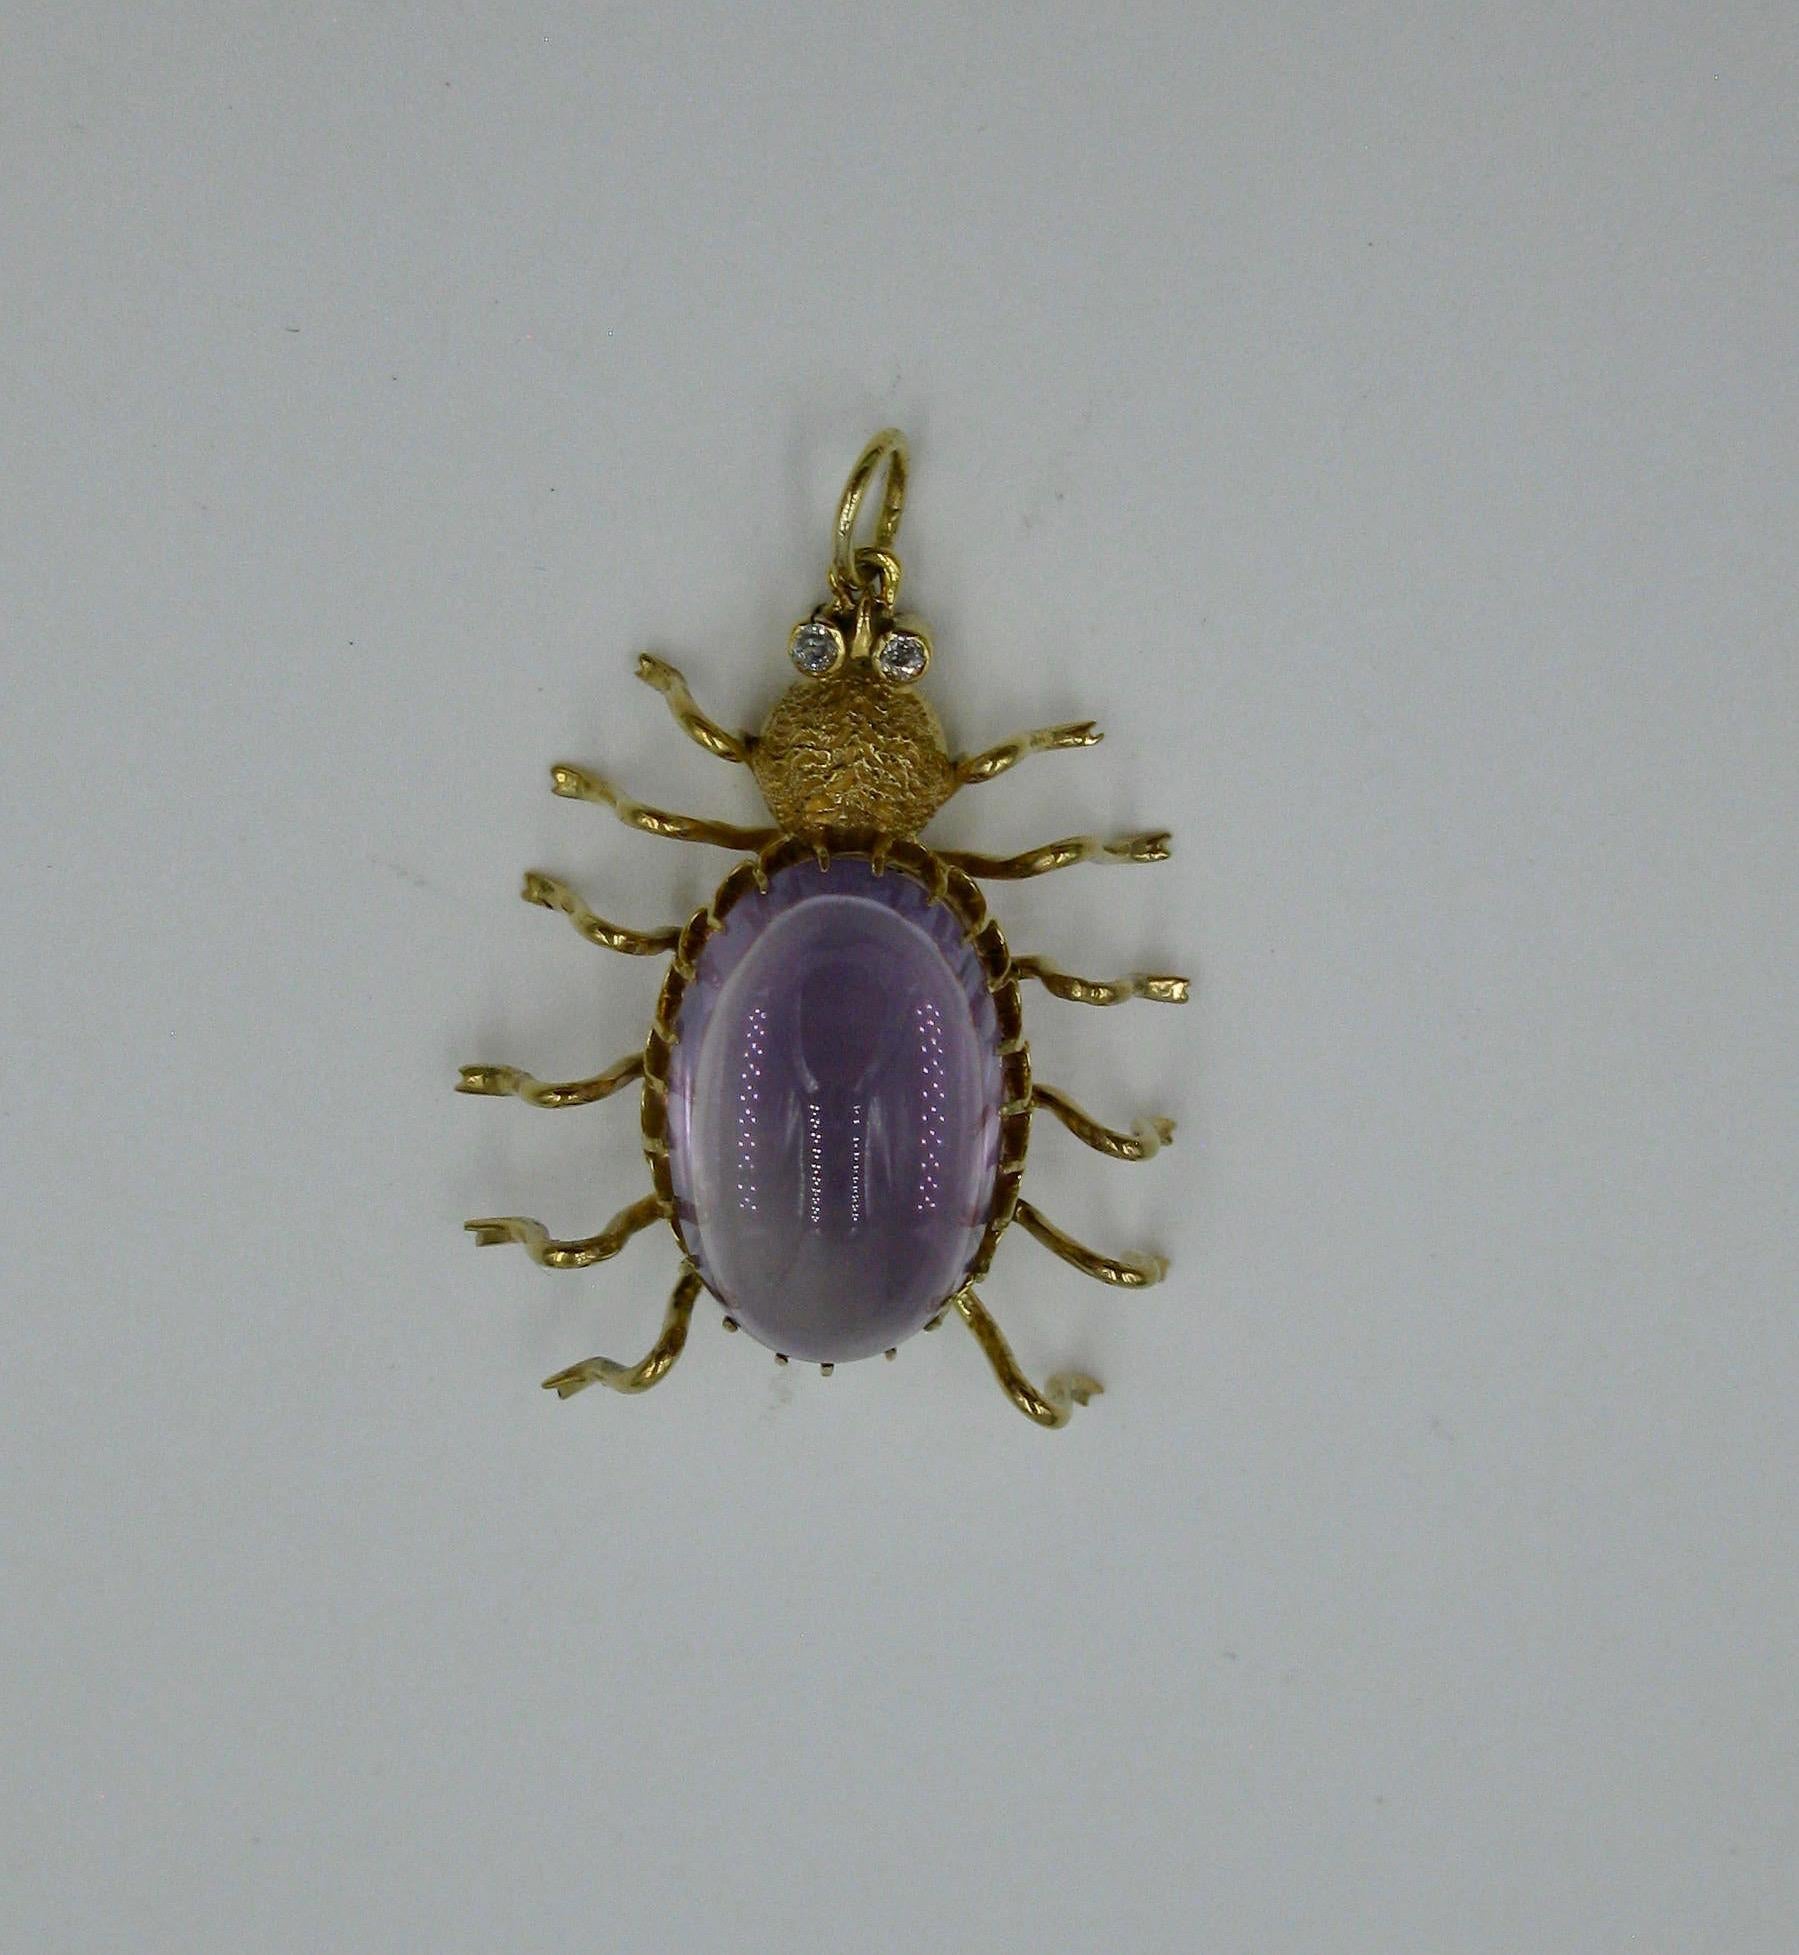 Antique 10 Carat Amethyst Diamond Spider Insect Pendant Necklace Vintage Gold For Sale 1